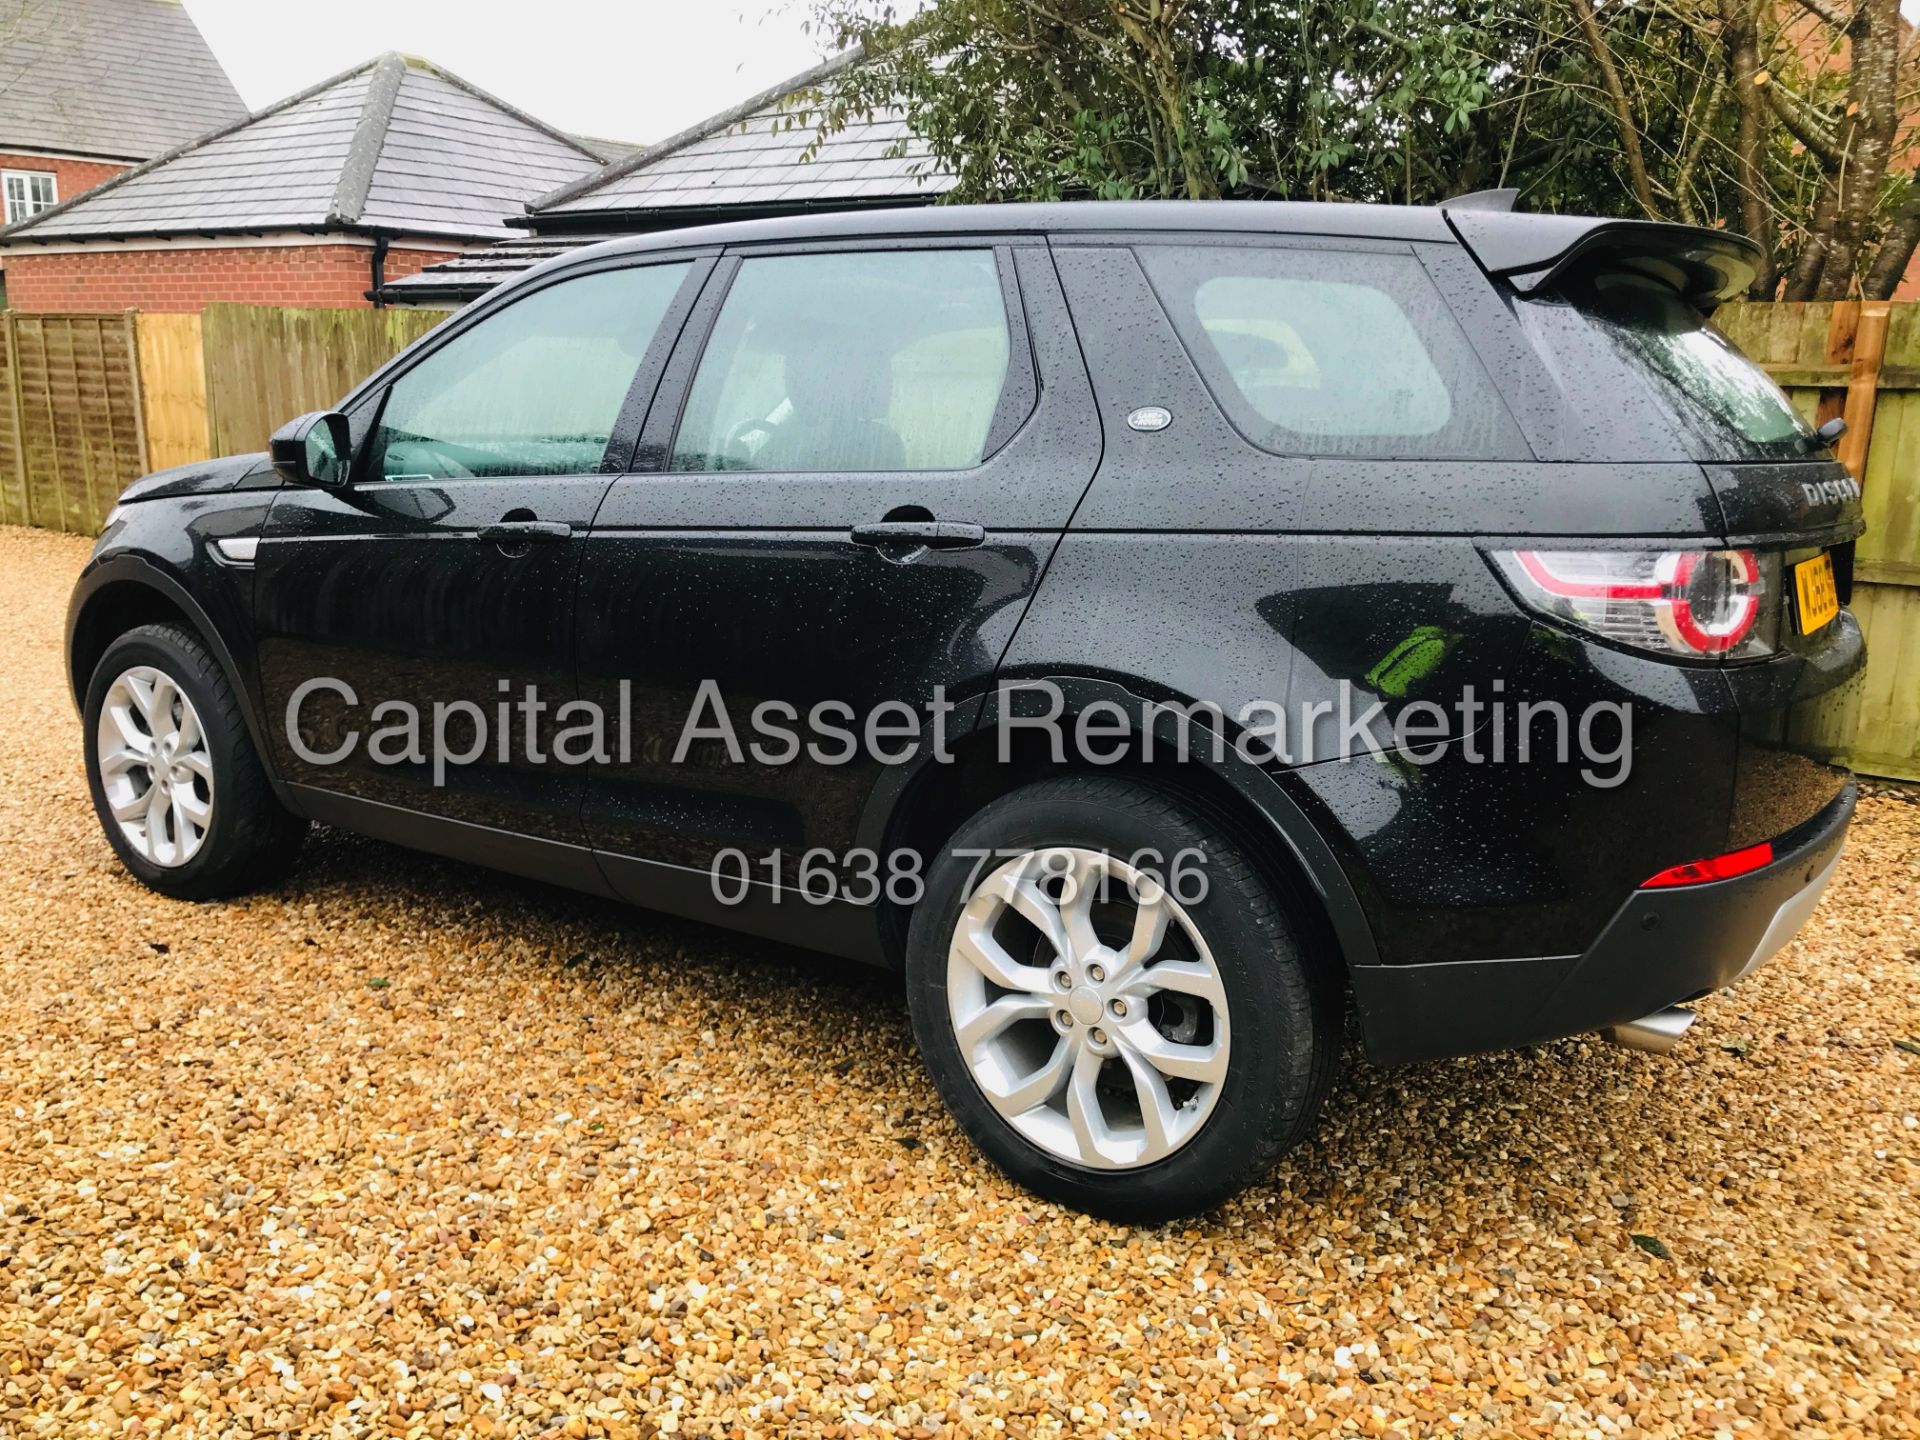 (ON SALE) LAND ROVER DISCOVERY SPORT "HSE - BLACK "AUTO 7 SEATER (2019 MODEL) PAN ROOF - HUGE SPEC - Image 12 of 37